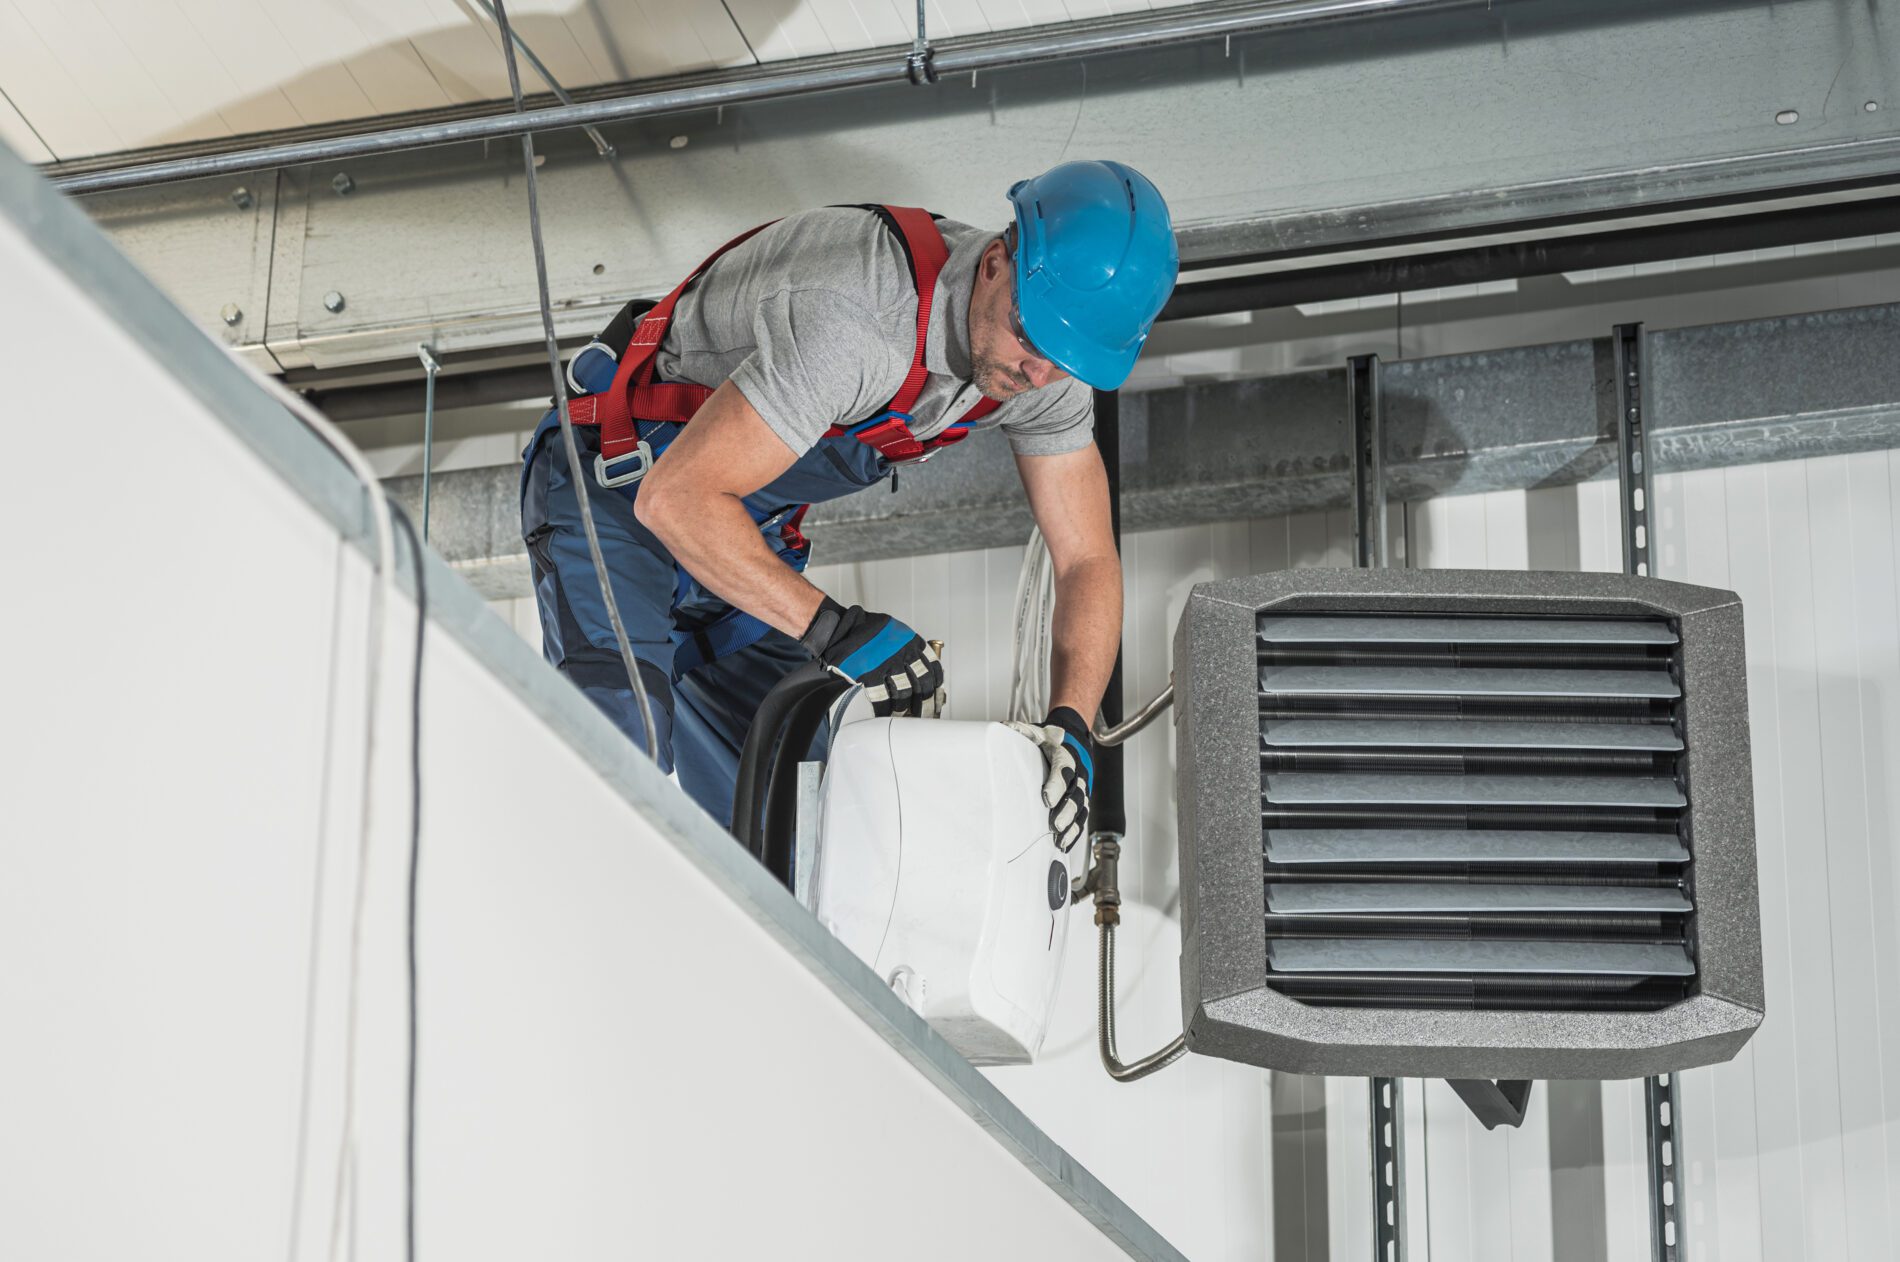 Heat It Right: Insider’s Guide to Energy-Efficient Furnace Installation in Garland TX